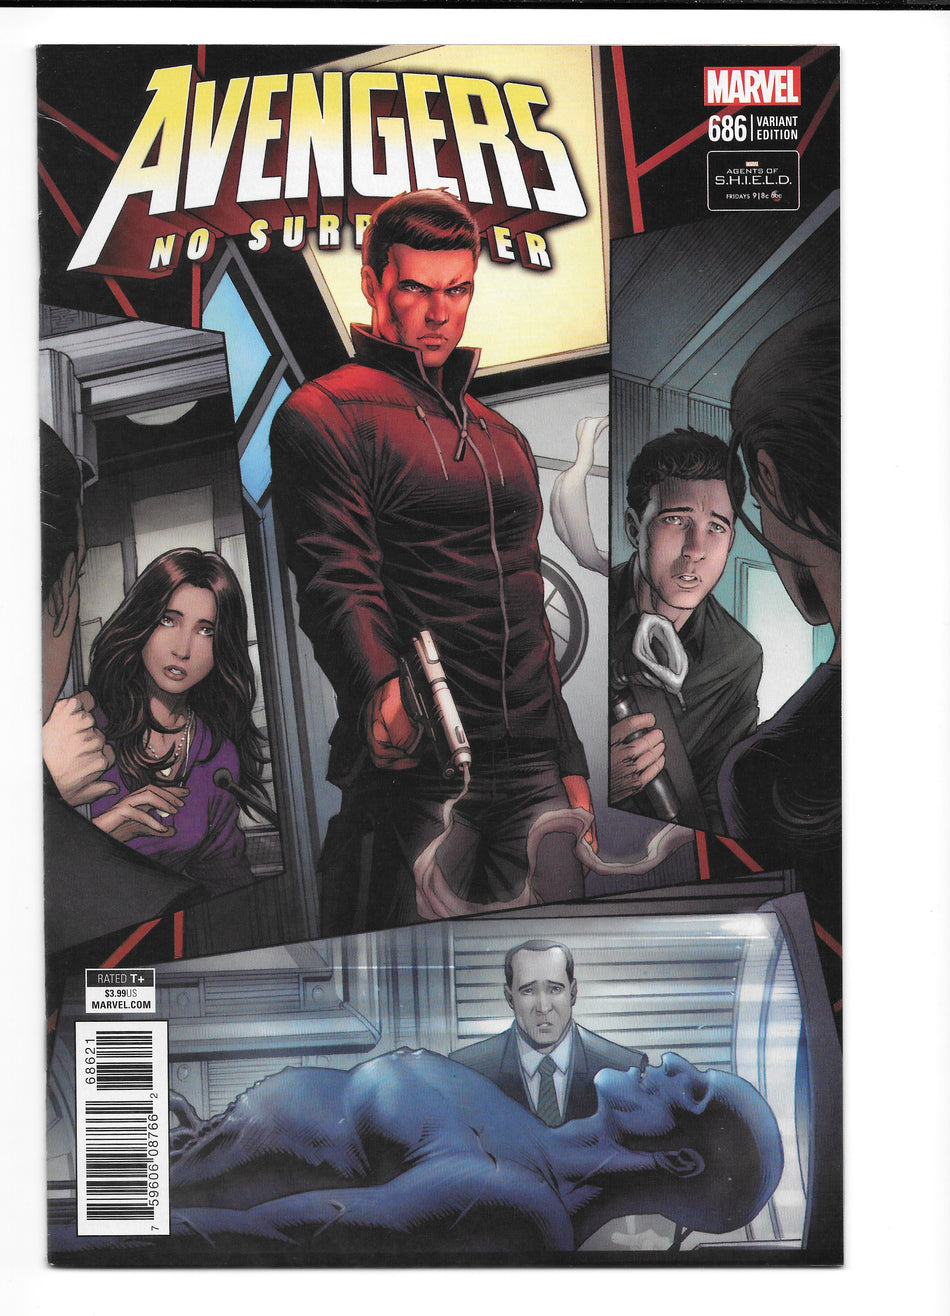 Photo of Avengers Issue 686 Keown Agents of Shield Road To 100 Var Leg comic sold by Stronghold Collectibles